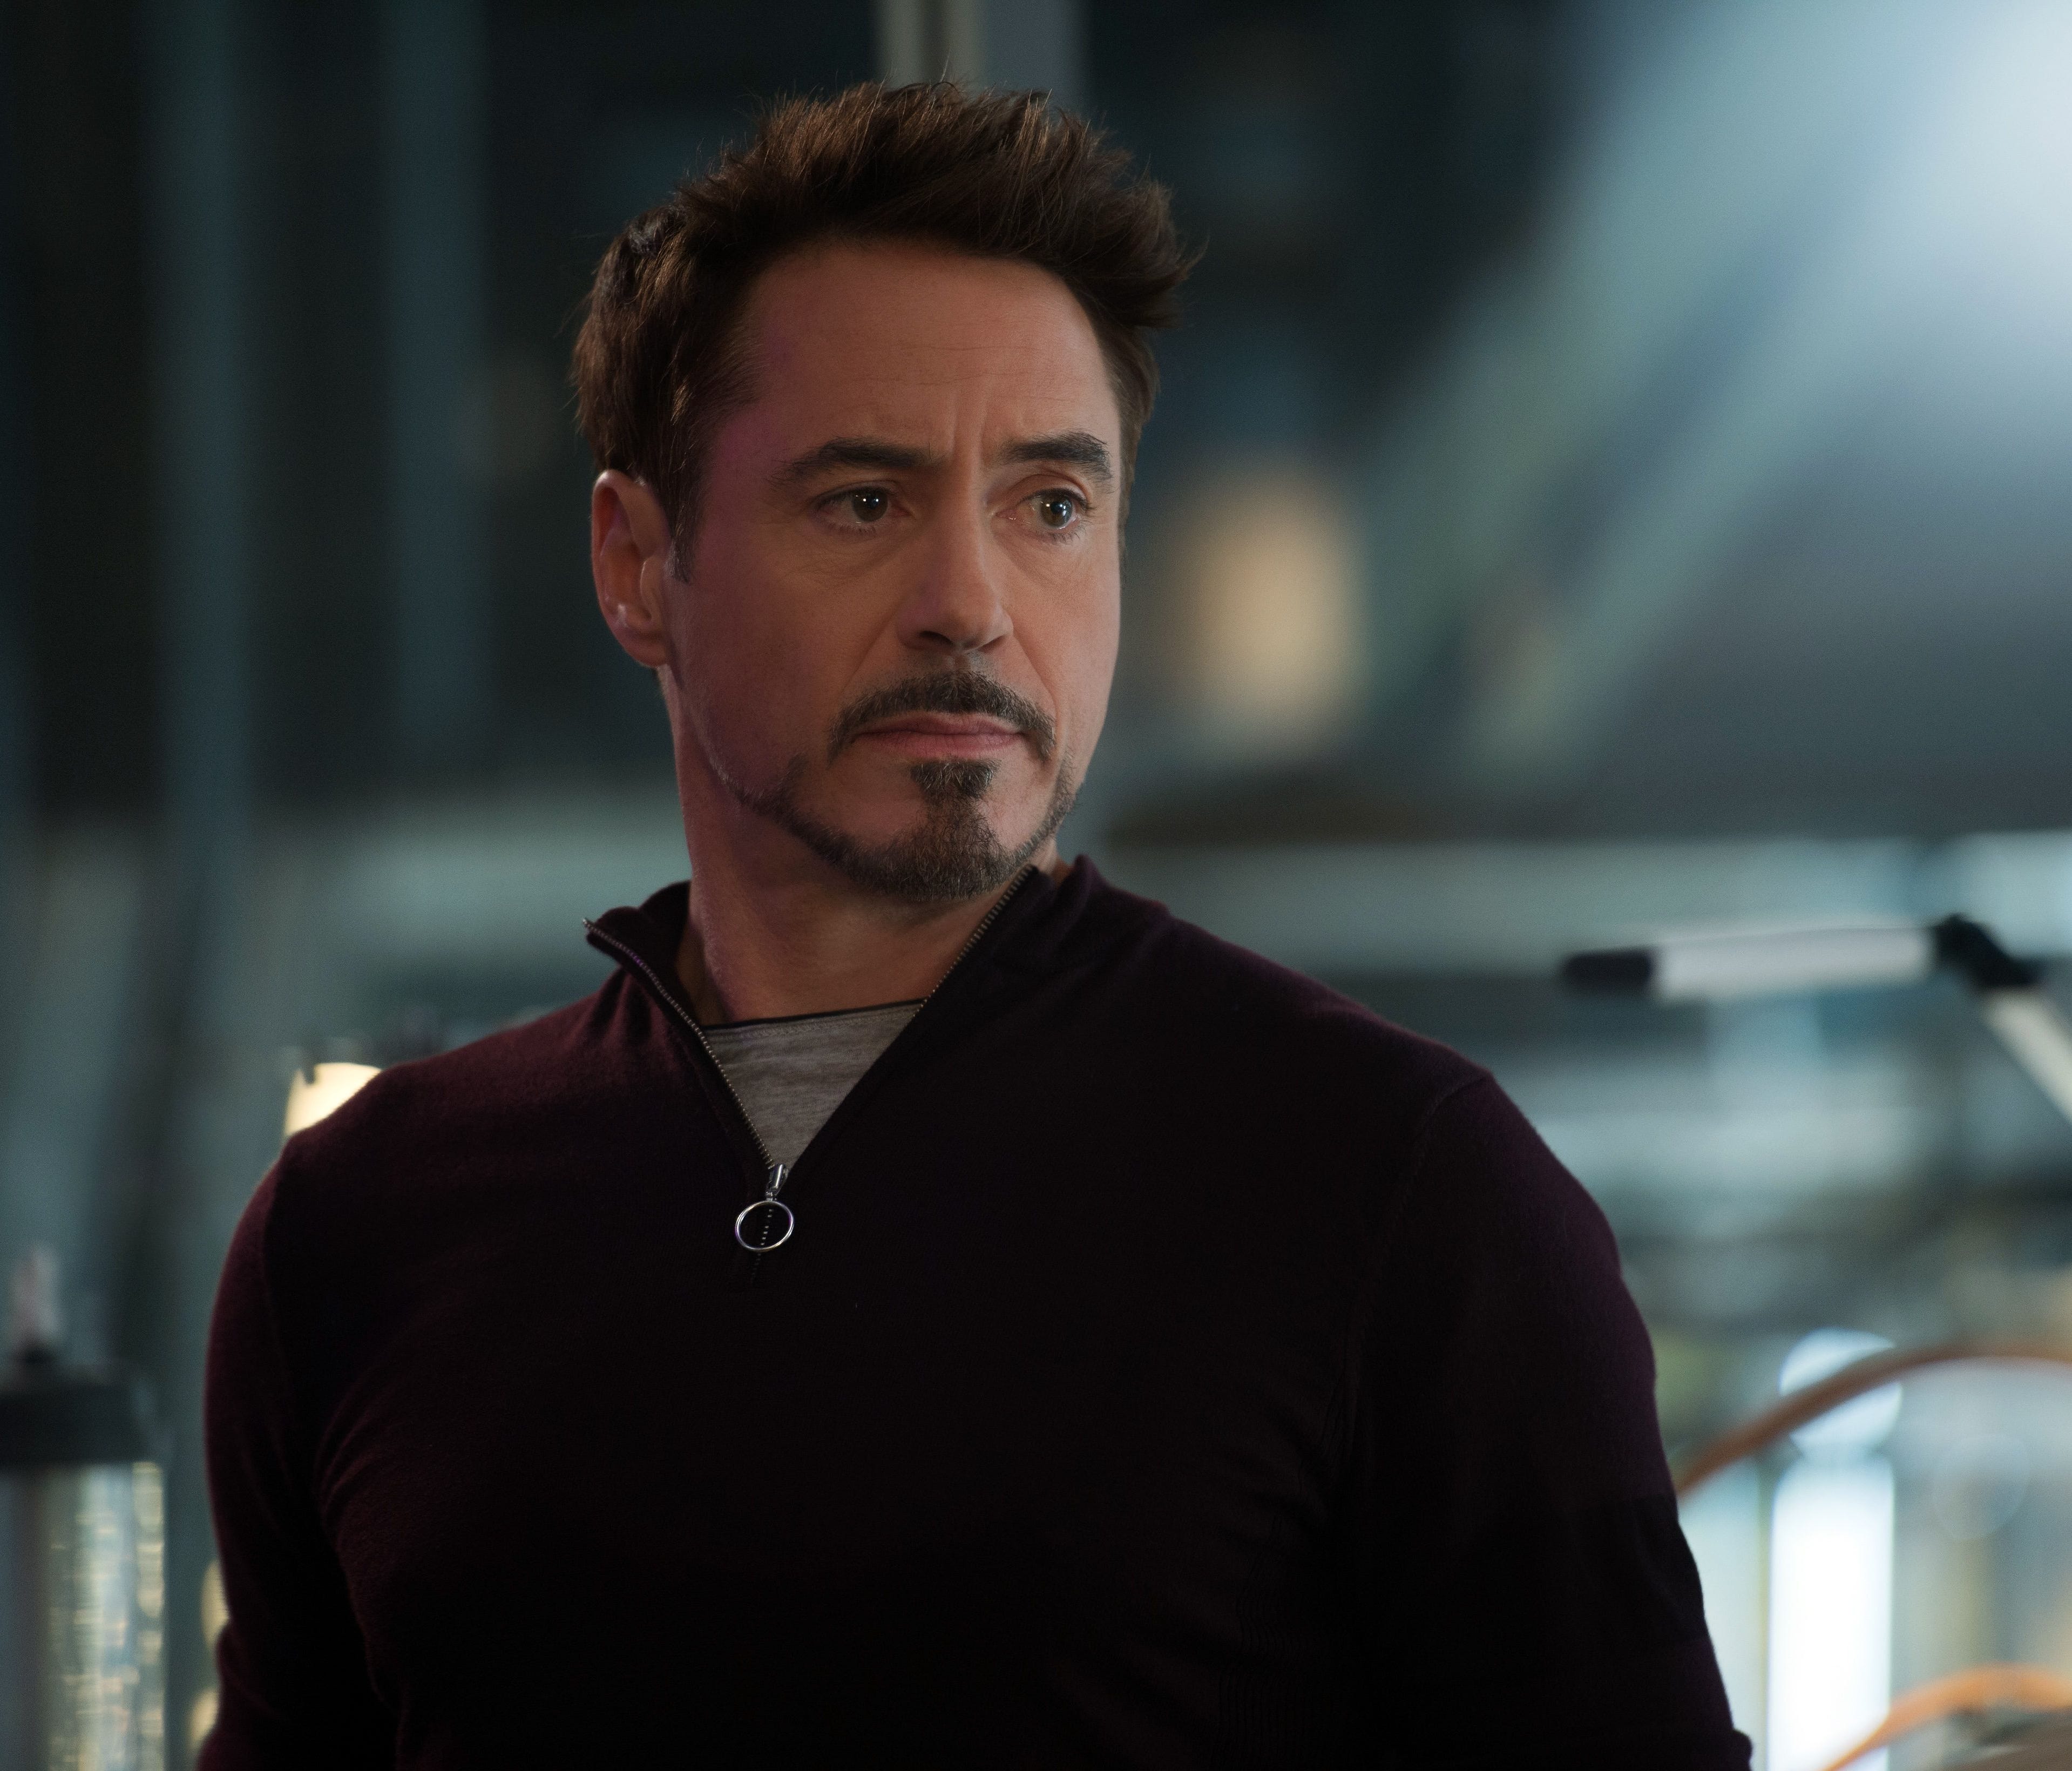 Robert Downey Jr., shown here in a scene from the motion picture 